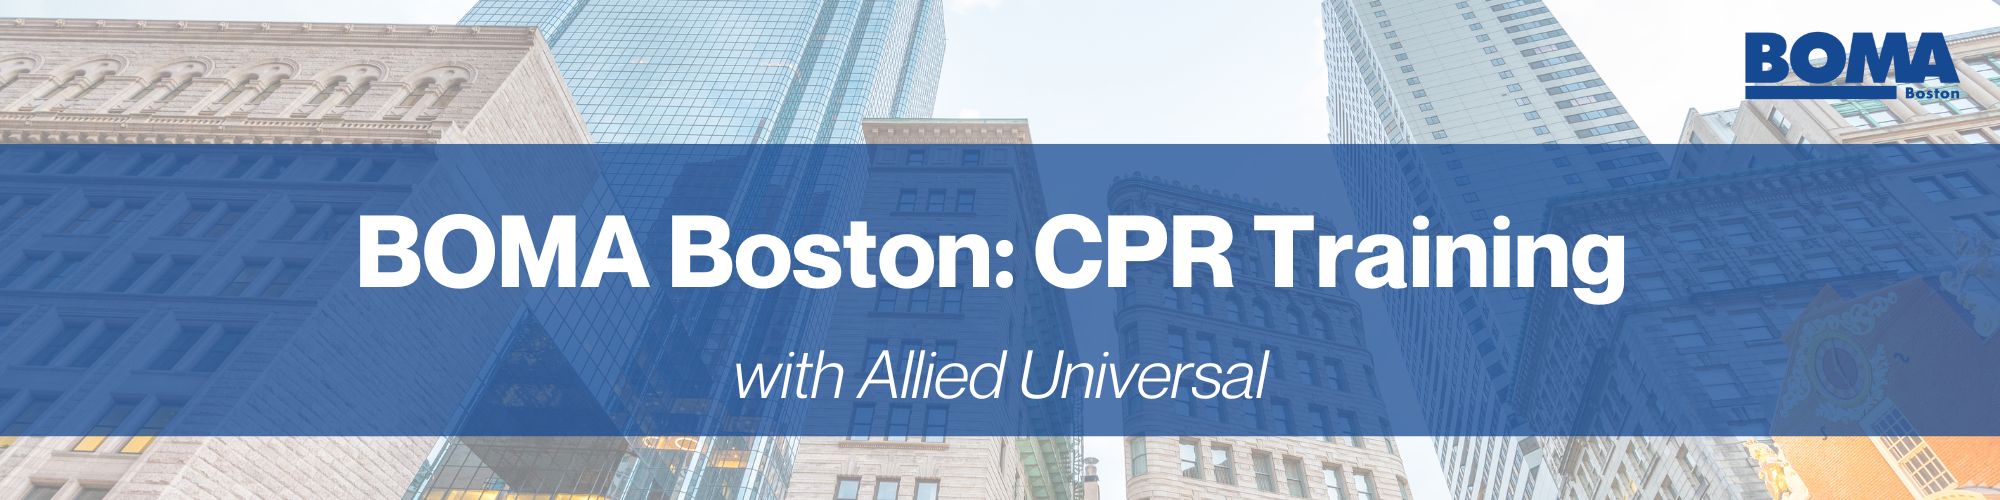 BOMA Boston: CPR Training with Allied Universal